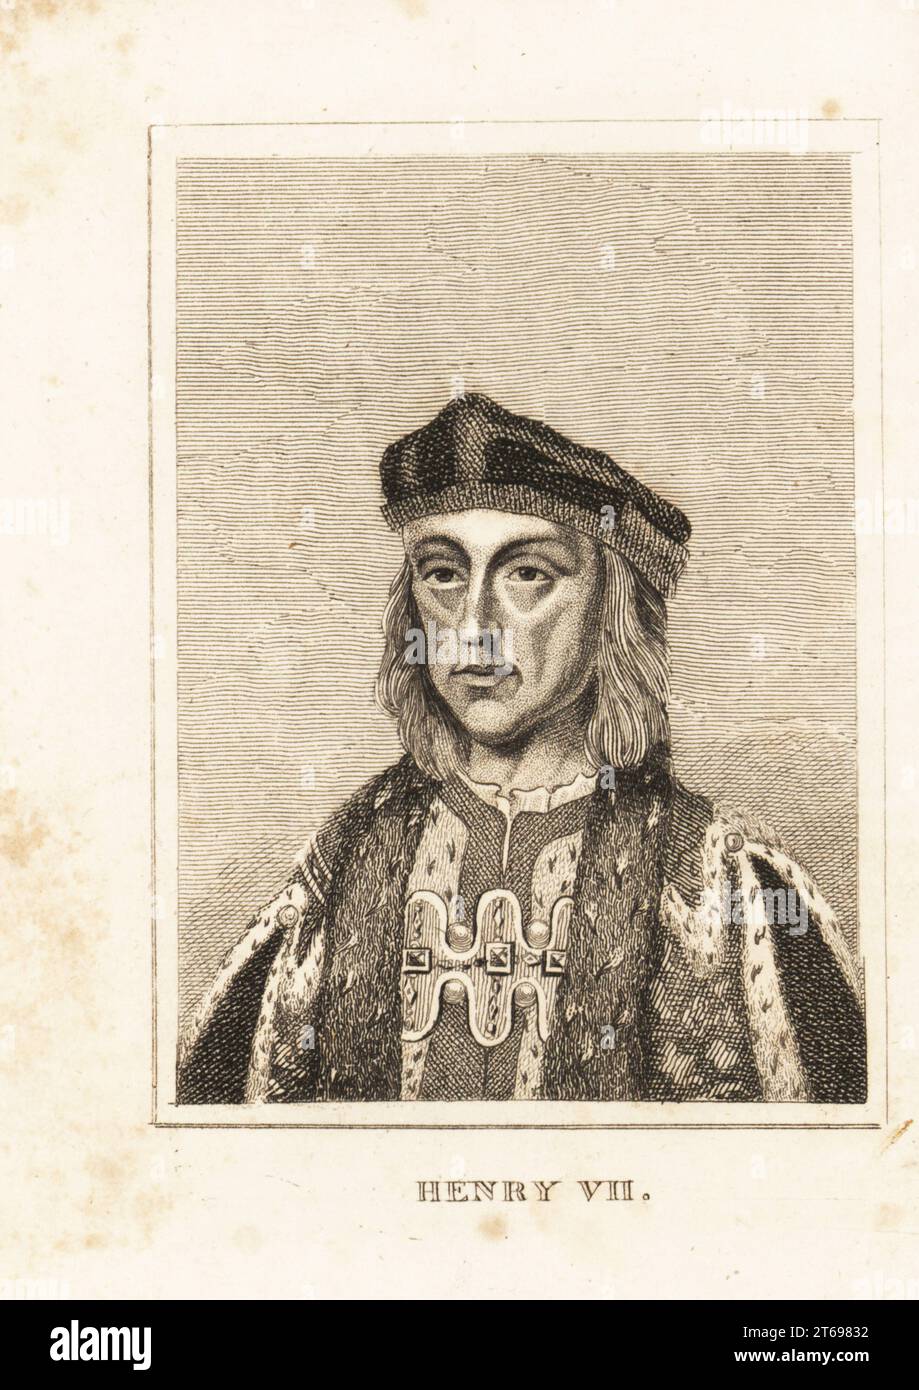 Portrait of King Henry VII of England, 1457-1509. Copperplate engraving from M. A. Jones History of England from Julius Caesar to George IV, G. Virtue, 26 Ivy Lane, London, 1836. Stock Photo